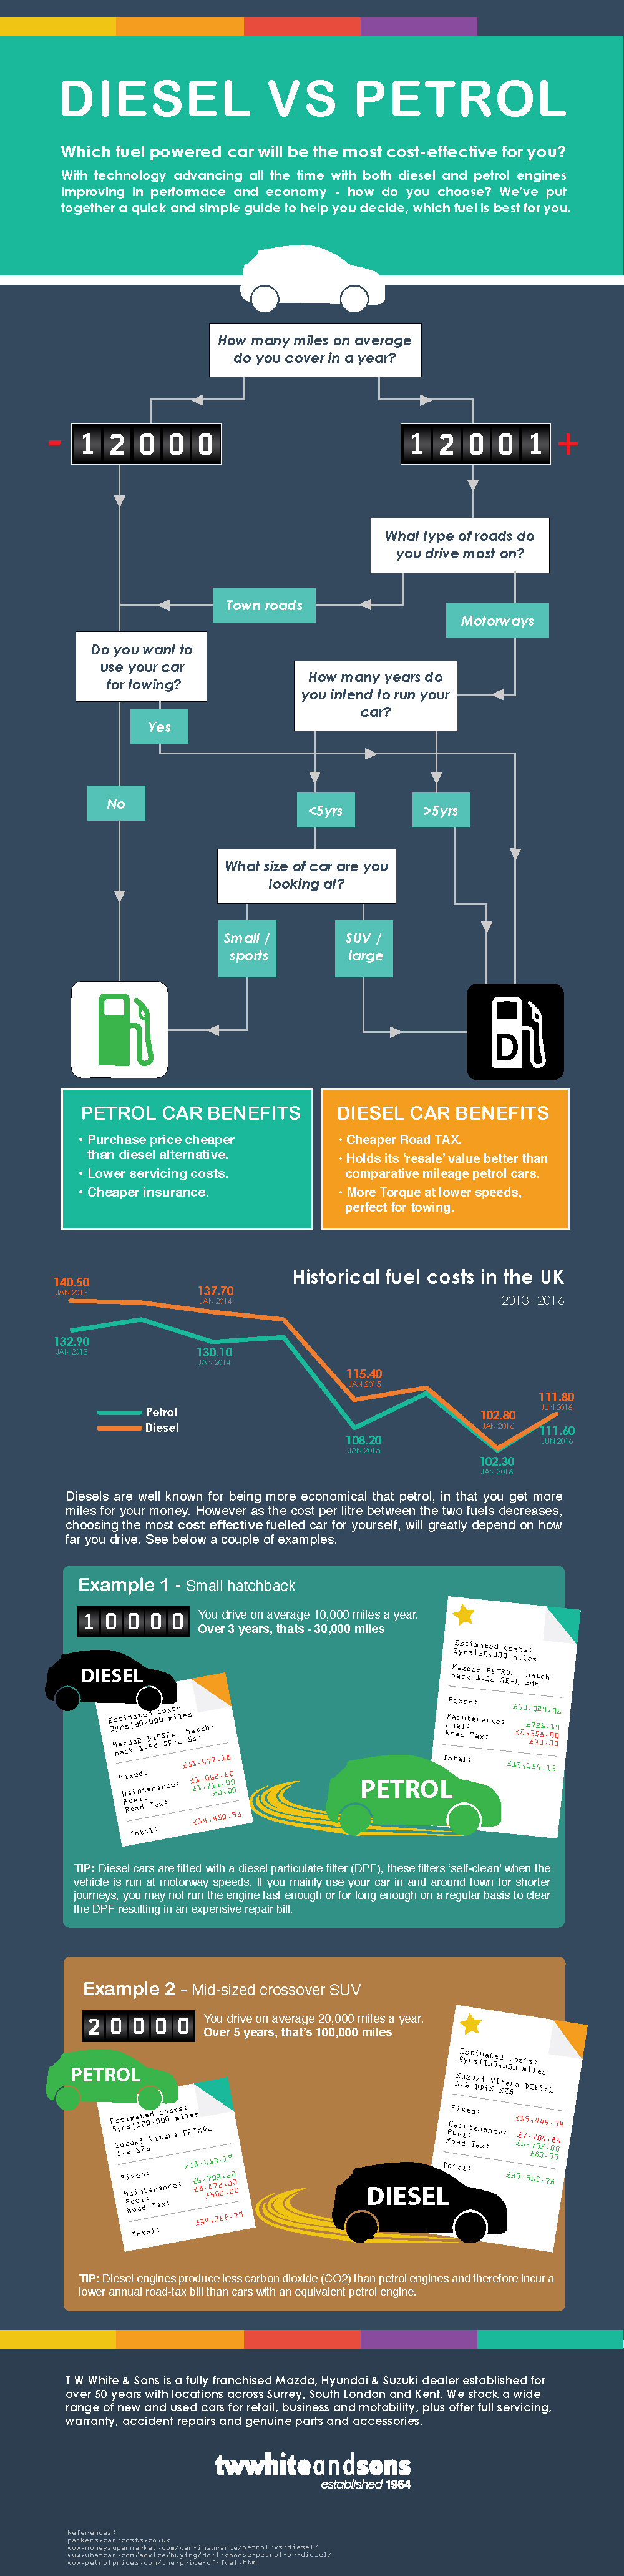 Diesel or Petrol infographic - which car do I buy?